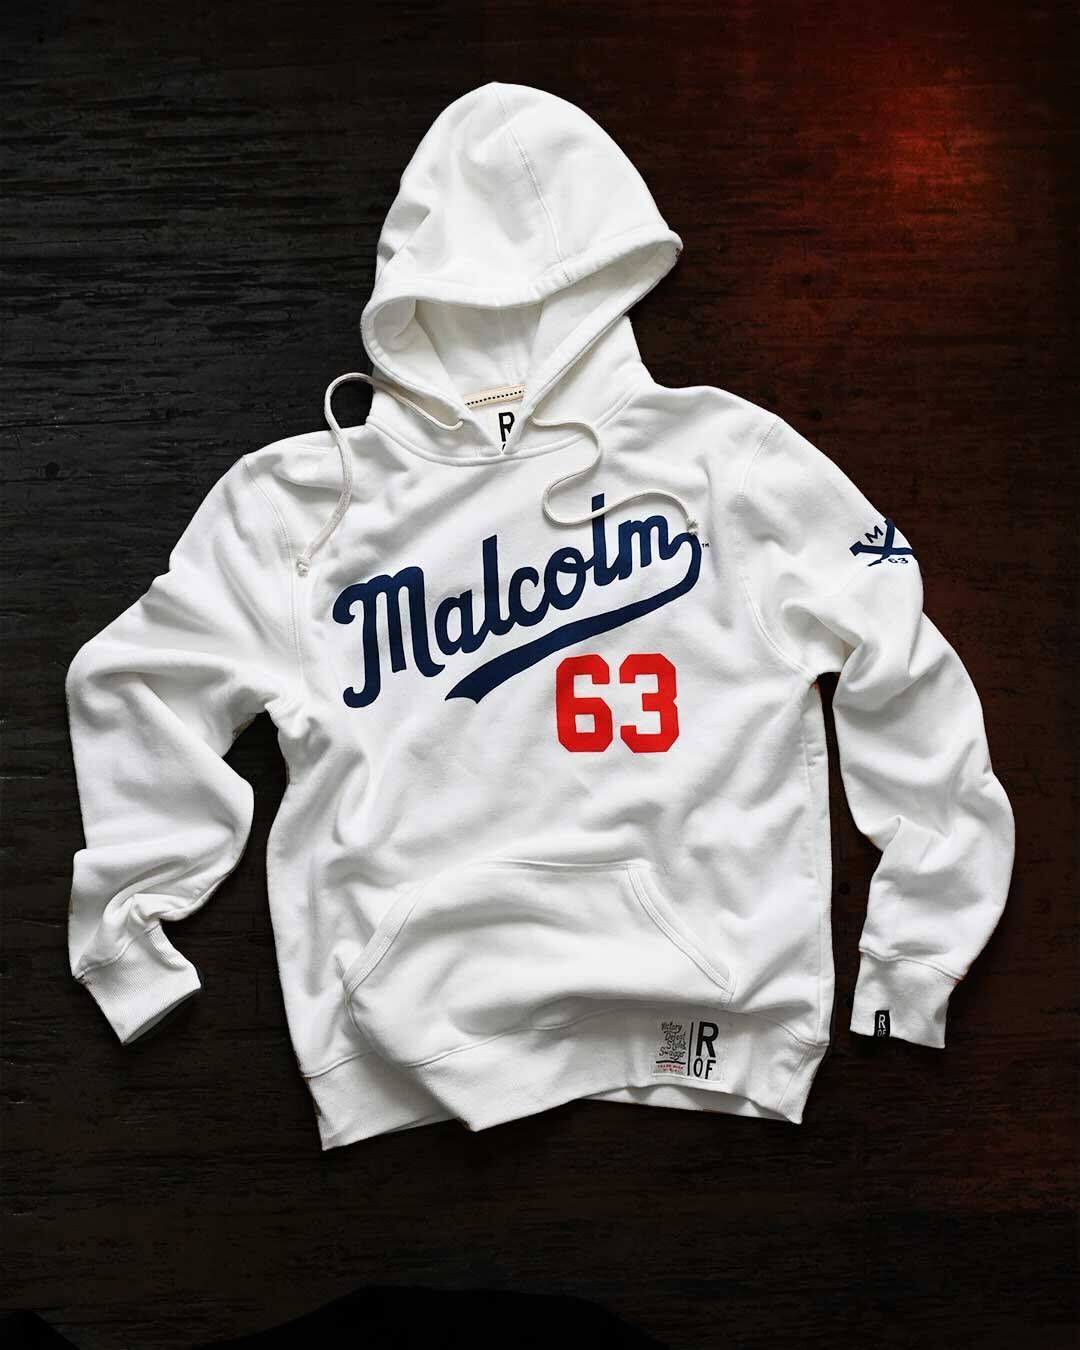 Malcolm X '63 Ivory Hoody - Roots of Fight Canada